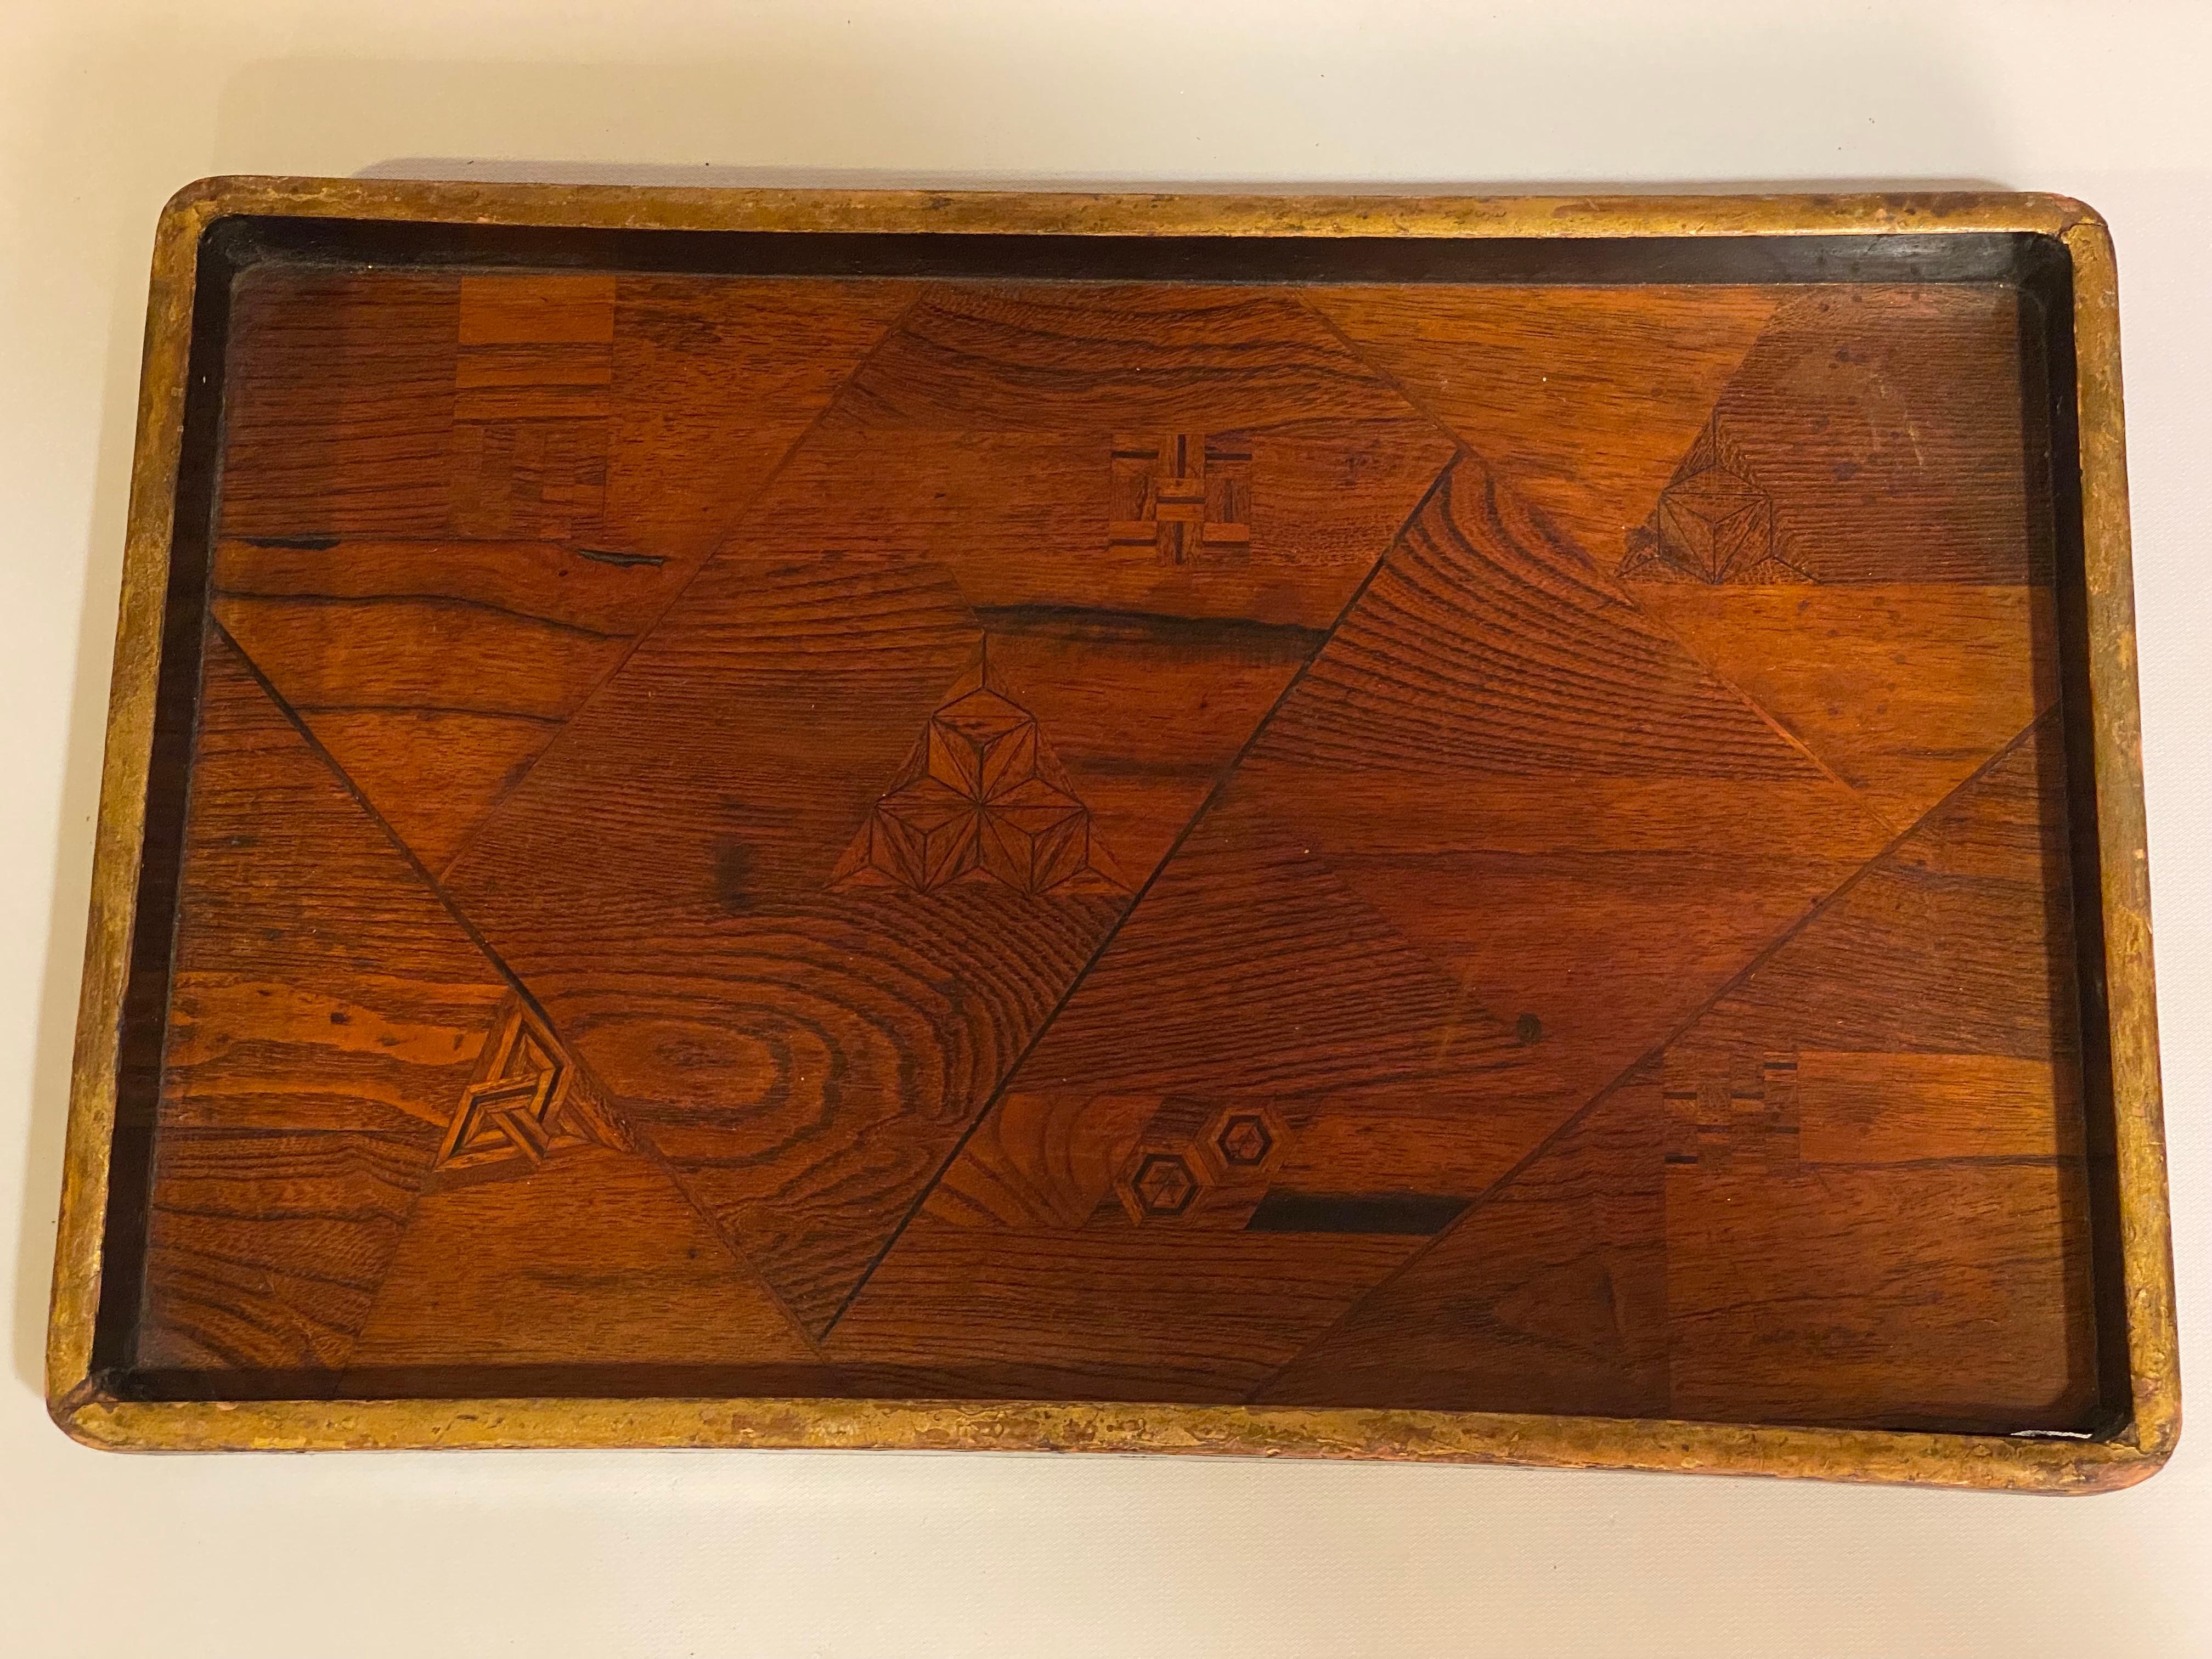 Japanese inlaid, lacquered and gilded tray. Possibly for the sacred tea ceremony. This tray has beautiful geometric inlays with a gilded edge and a black lacquer exterior. Circa 1880-1900. The inlays look to be oak, rosewood and some other exotic